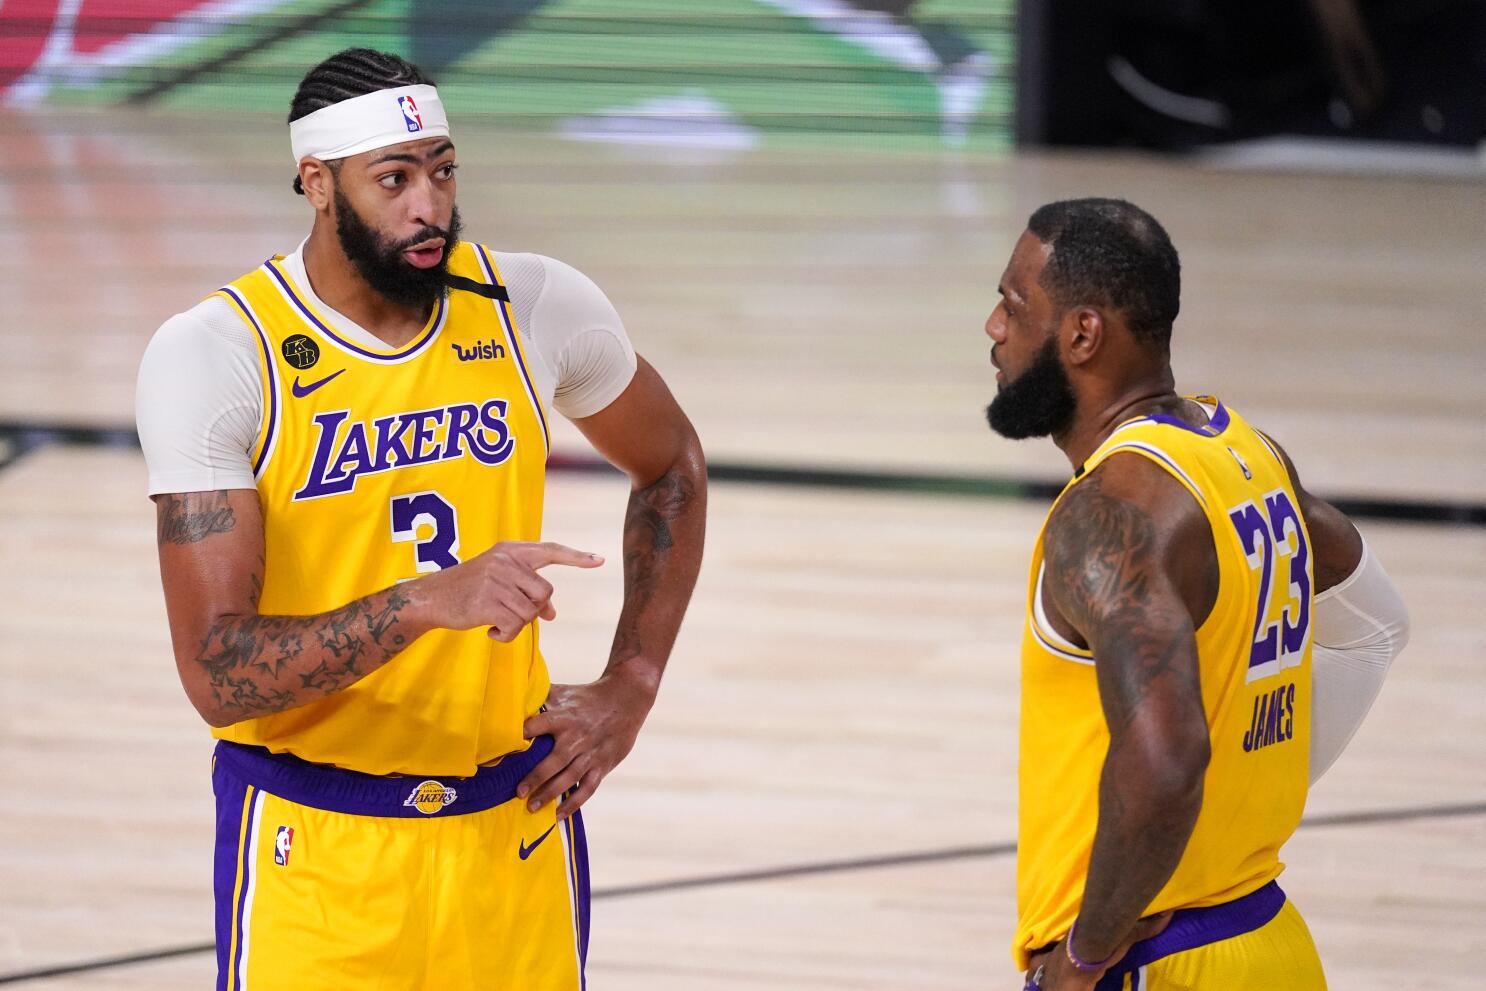 Report: Lakers announce starting lineup for Sunday's matchup vs